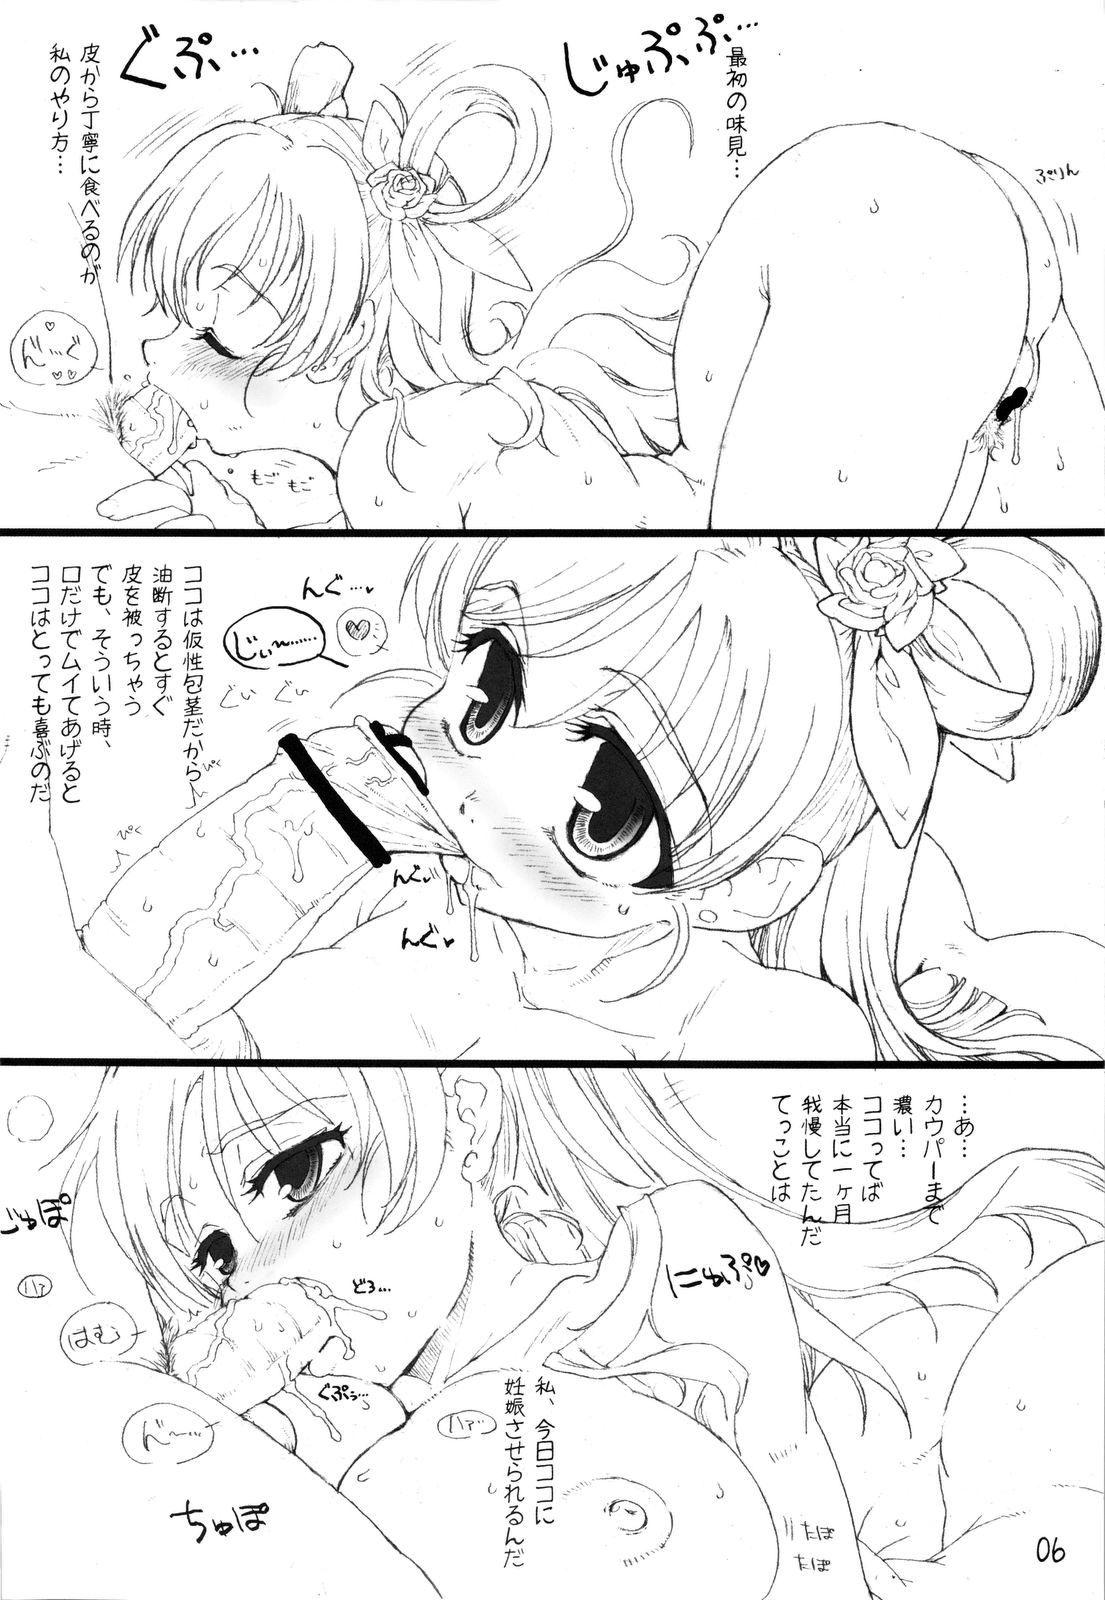 Sluts Dream to Issho! - Yes precure 5 Teen Sex - Page 6